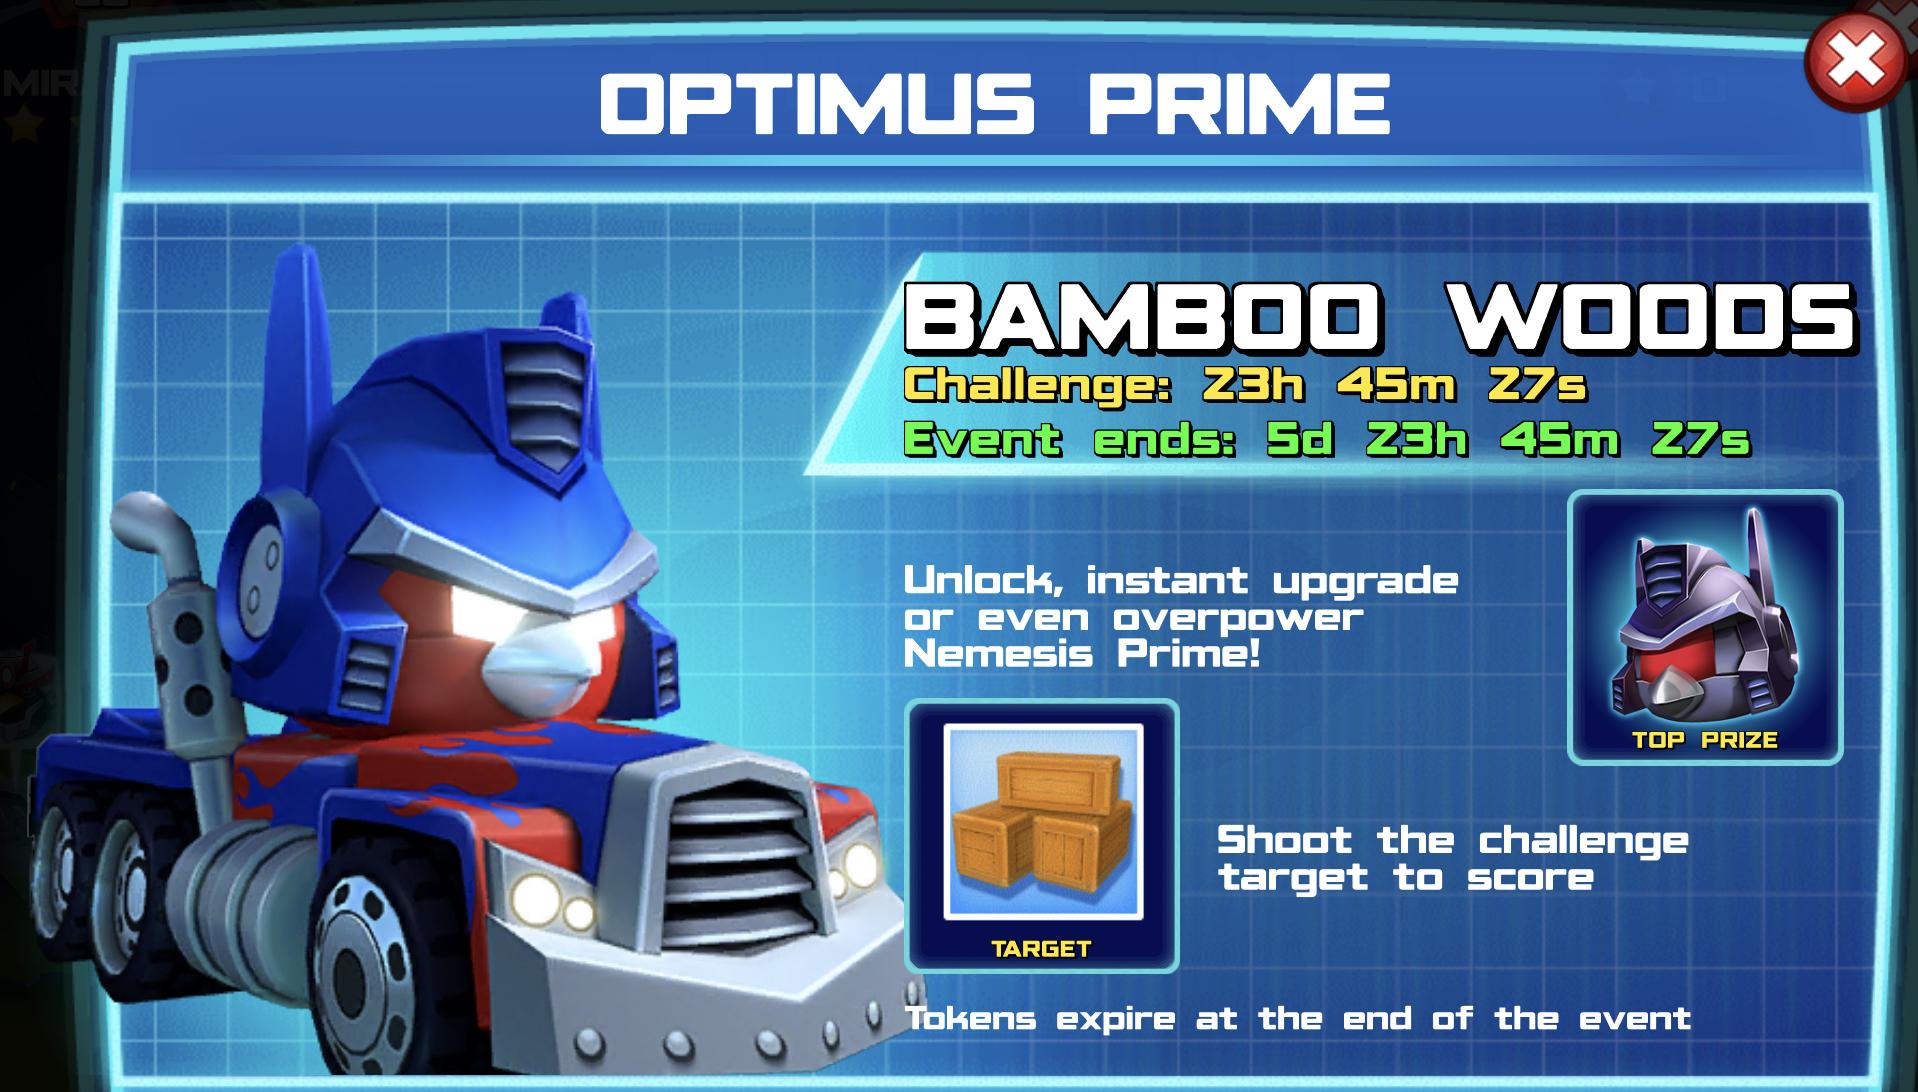 The event banner for Optimus Prime